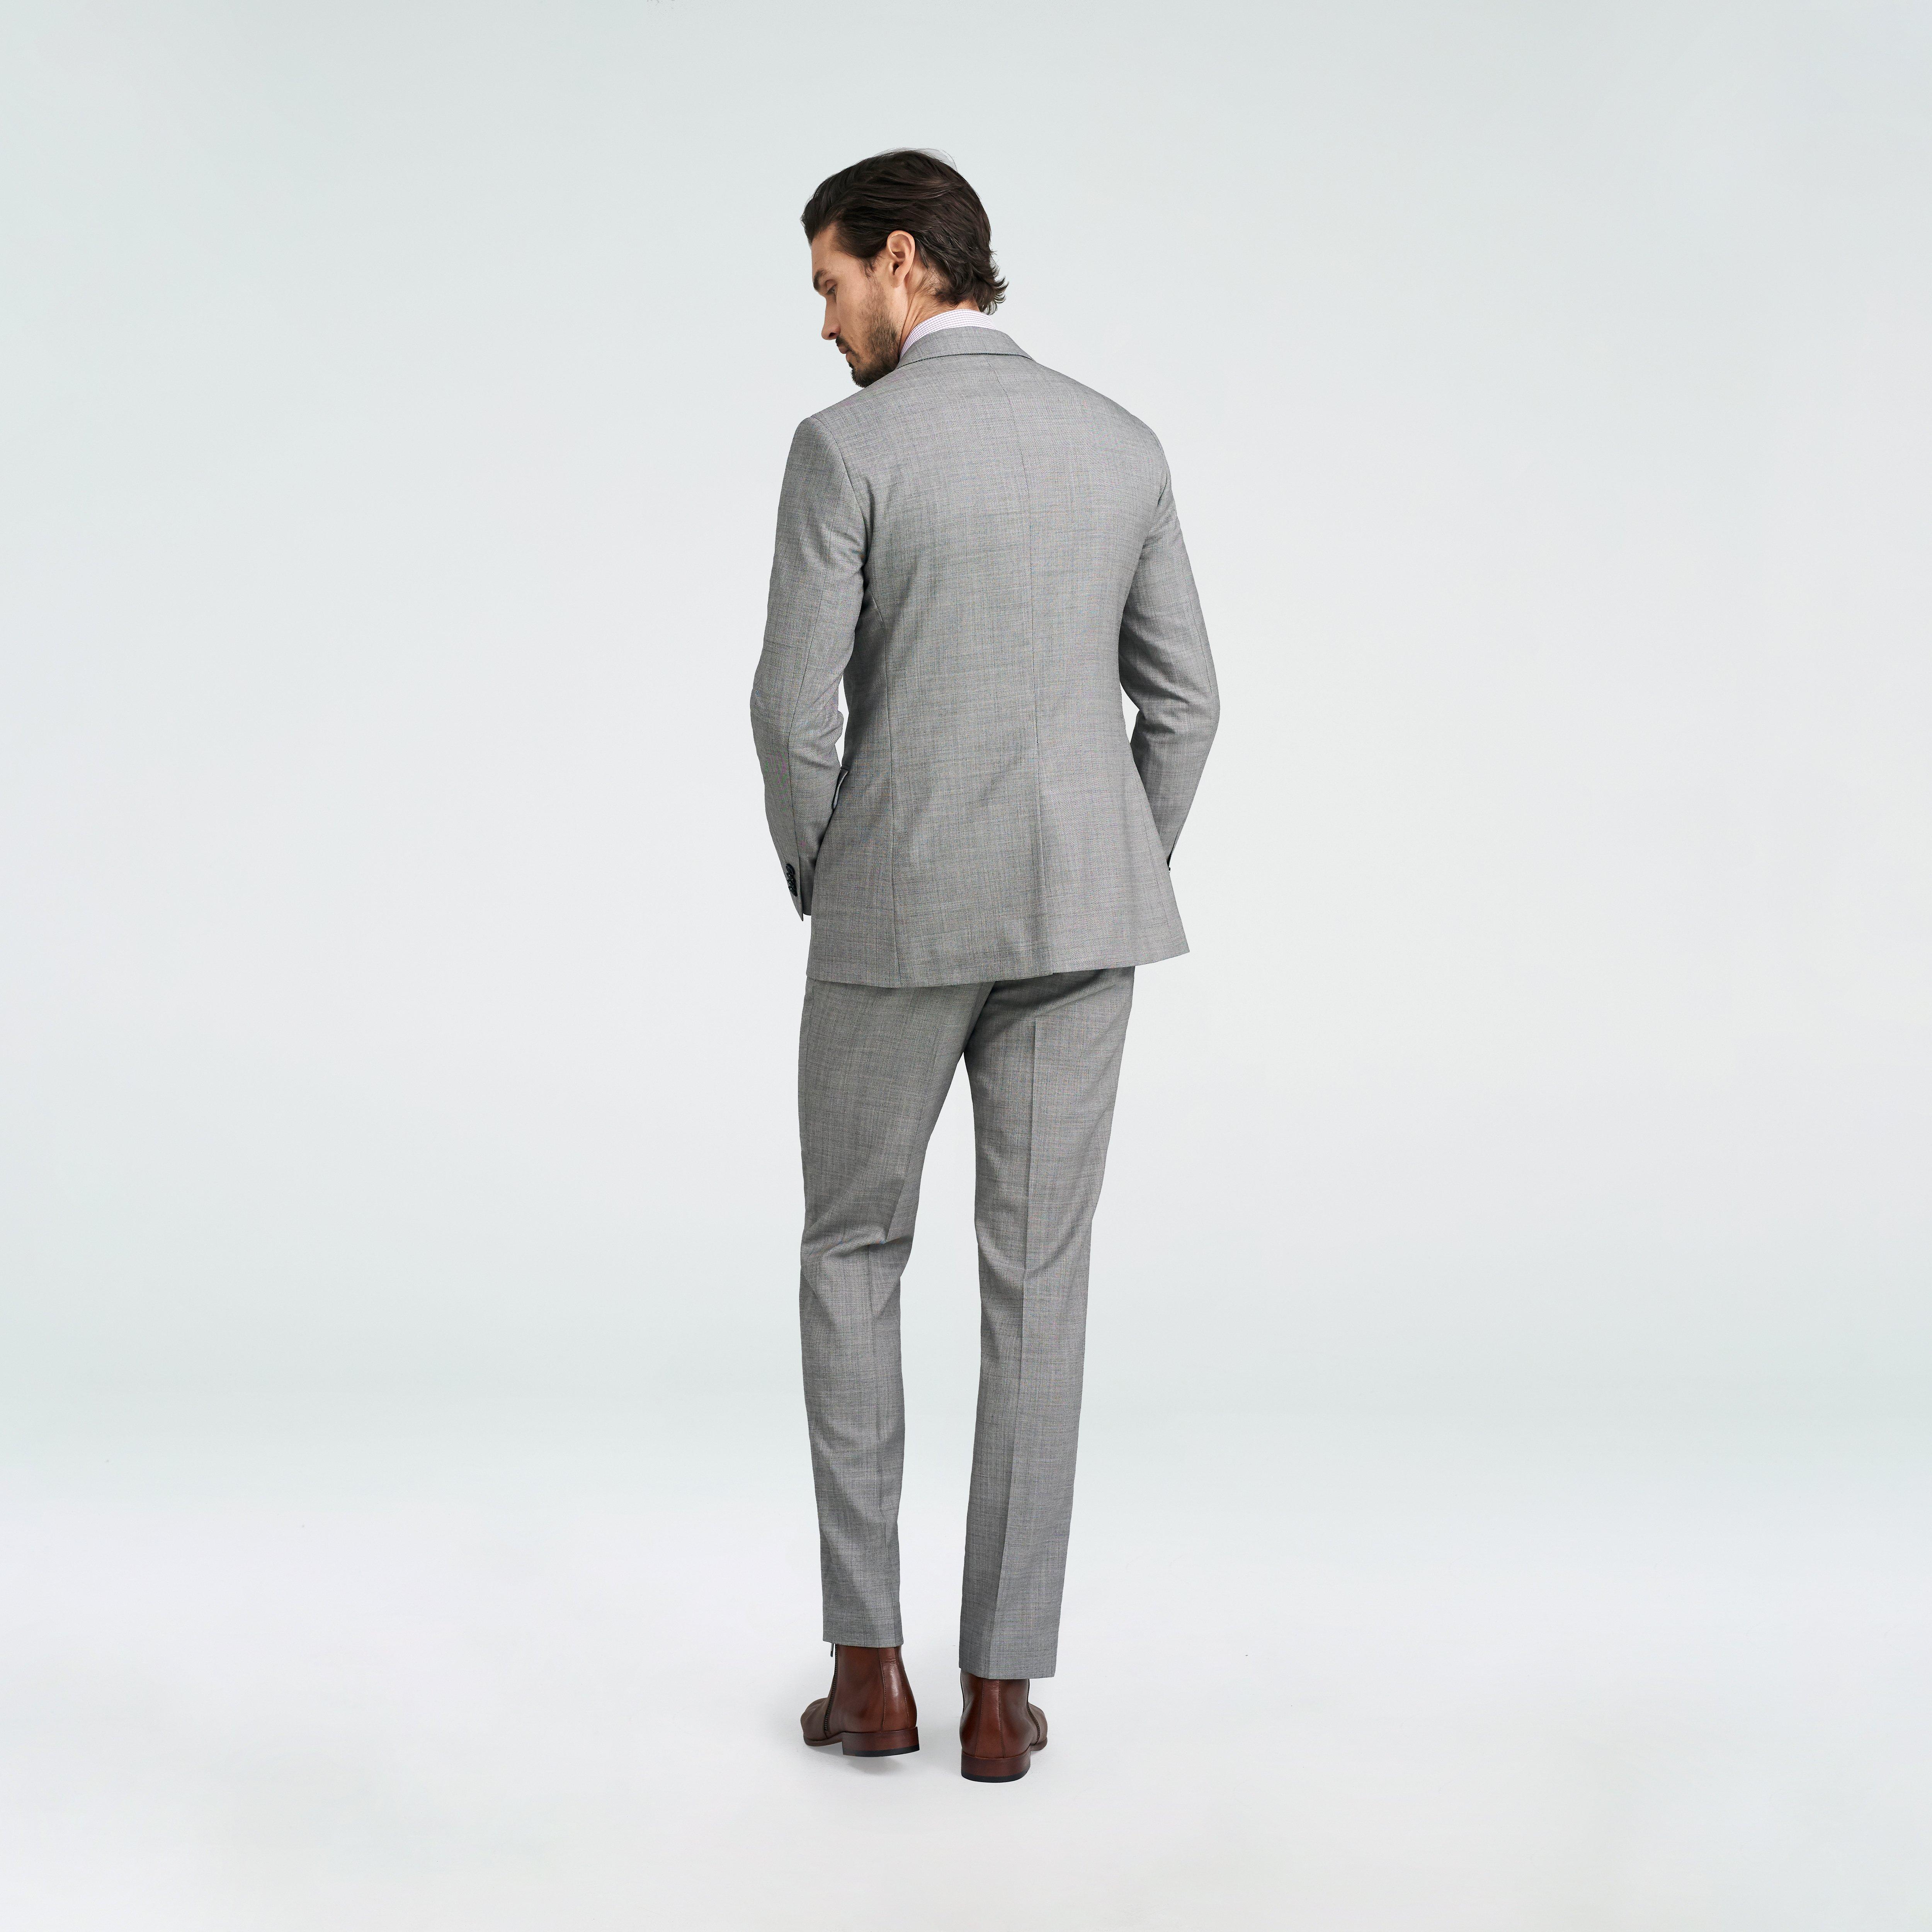 Custom Suits Made For You - Hayle Sharkskin Light Gray Suit | INDOCHINO